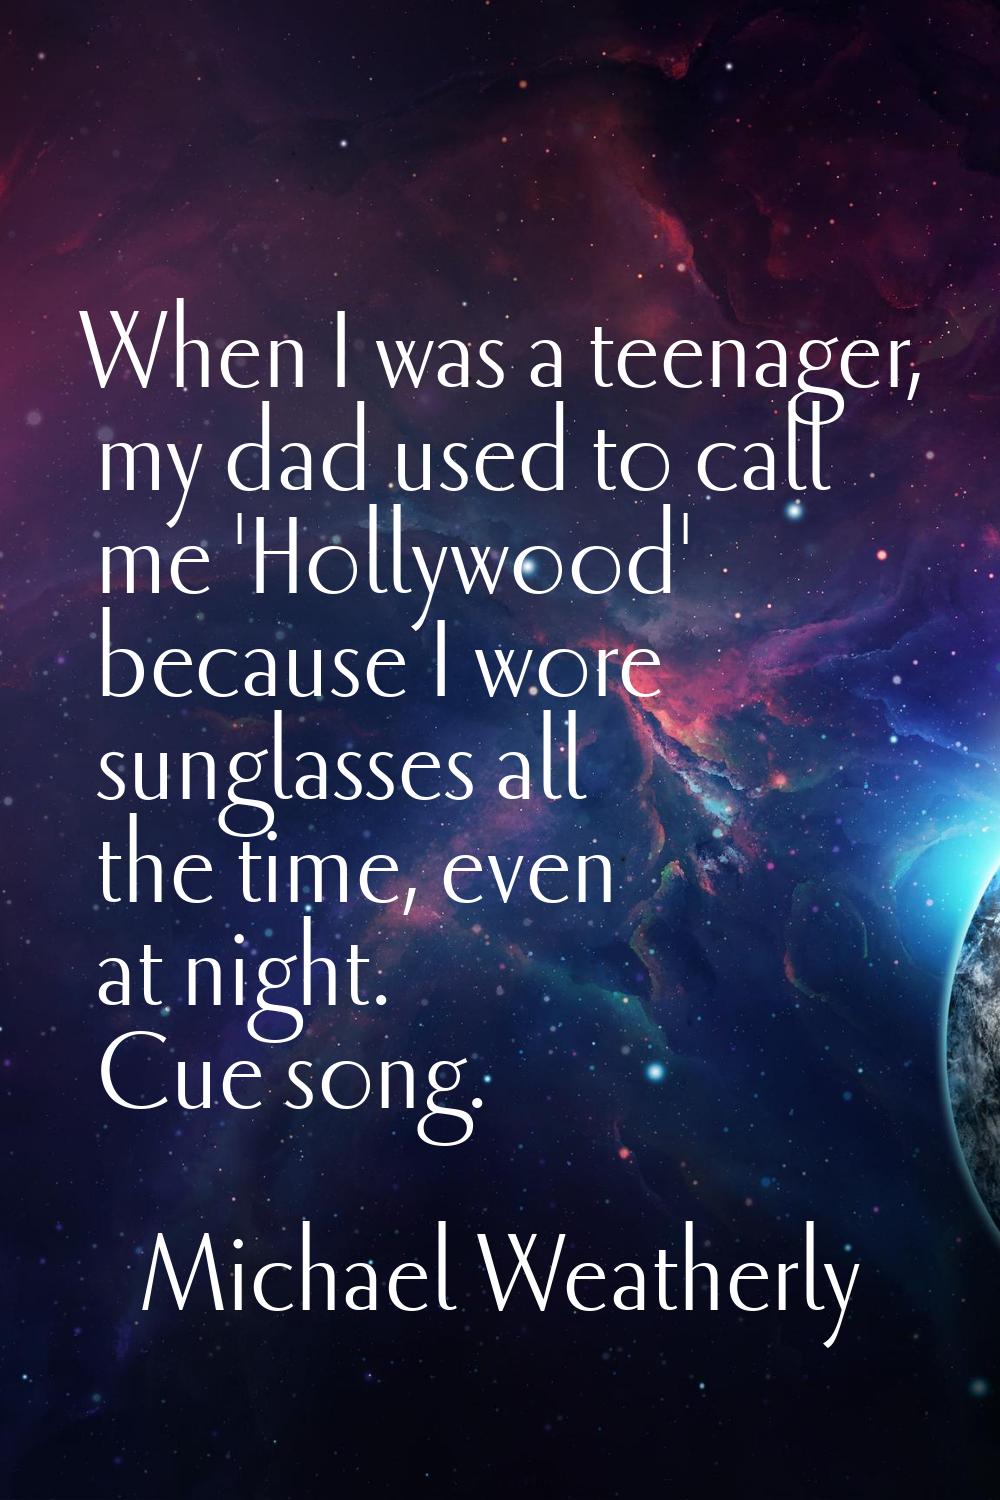 When I was a teenager, my dad used to call me 'Hollywood' because I wore sunglasses all the time, e